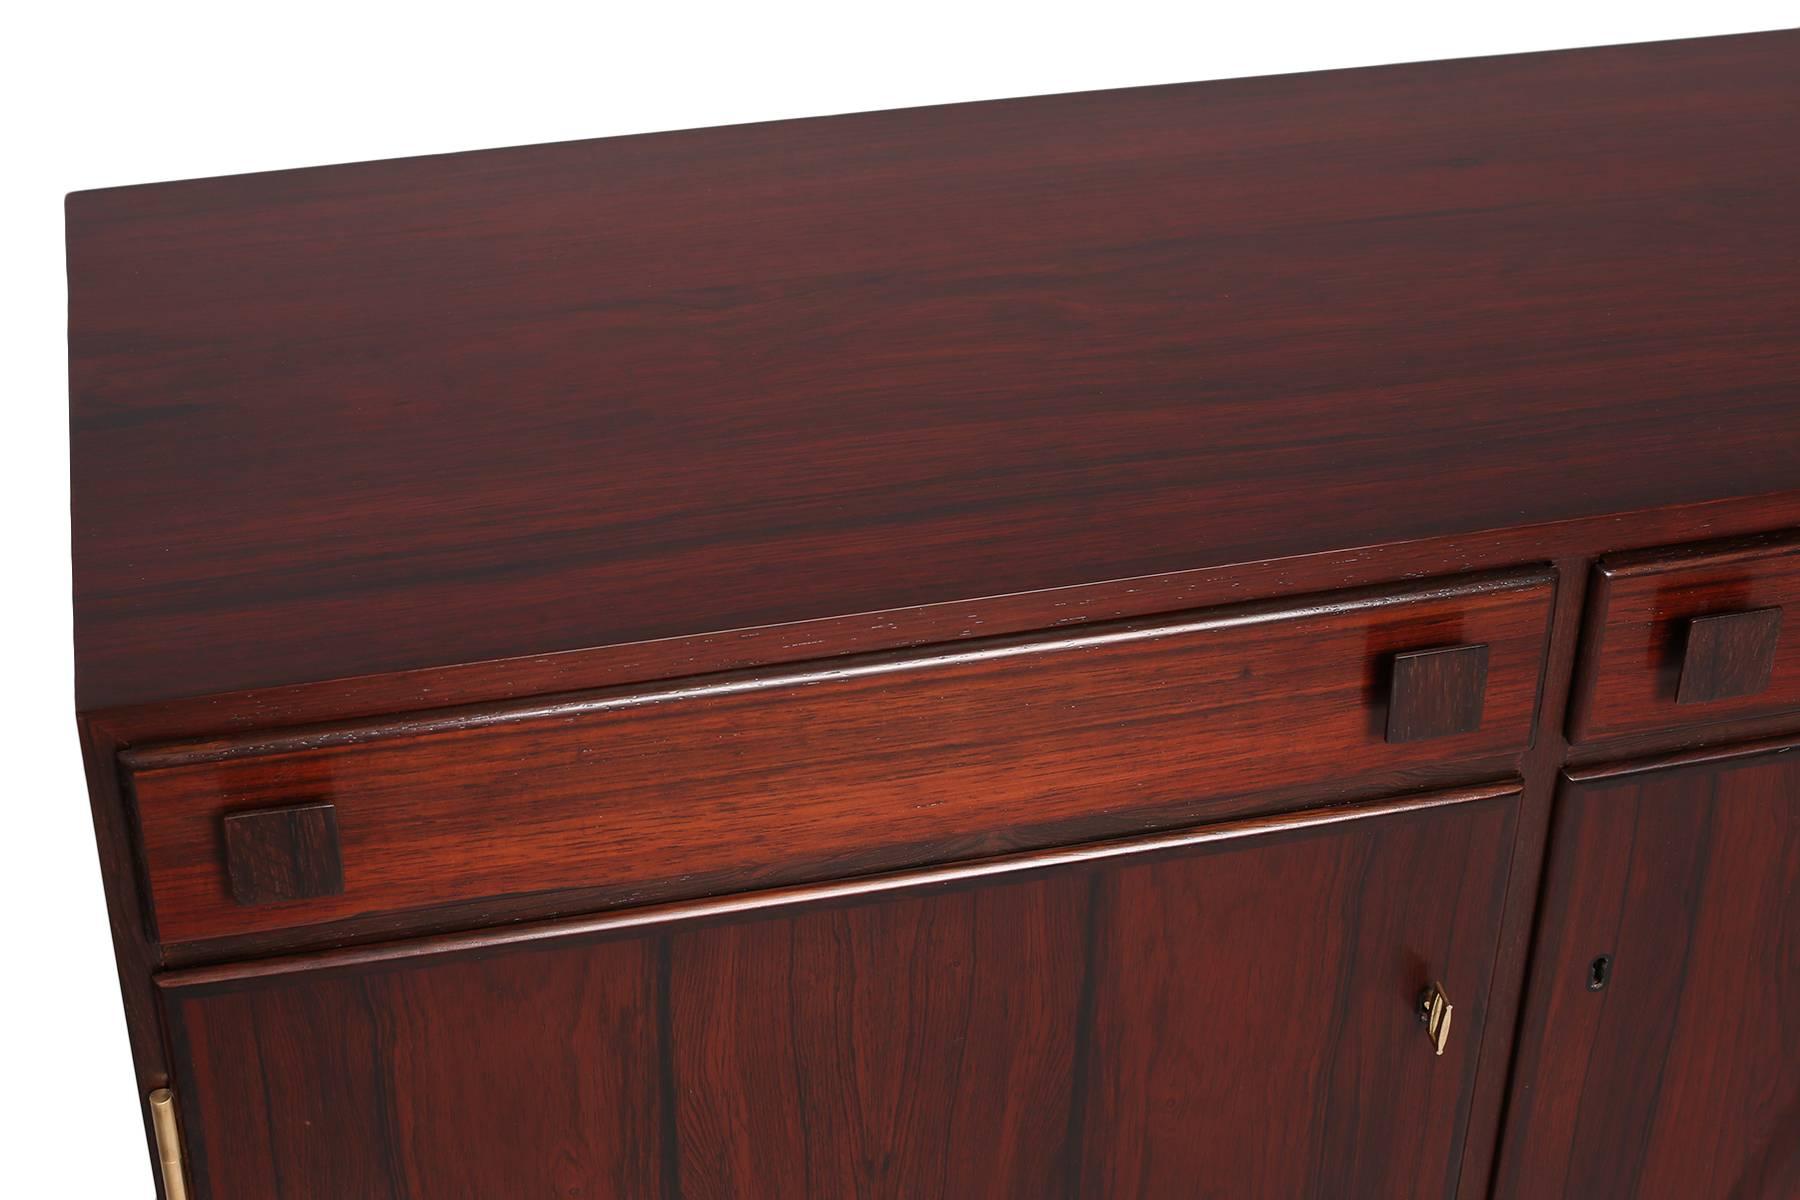 Takashi Okamura & Erik Marqurdsen rosewood chest, circa late 1950s. This elegant example has a beautifully grained rosewood case, two drawers and adjustable interior shelves. It has been newly refinished.